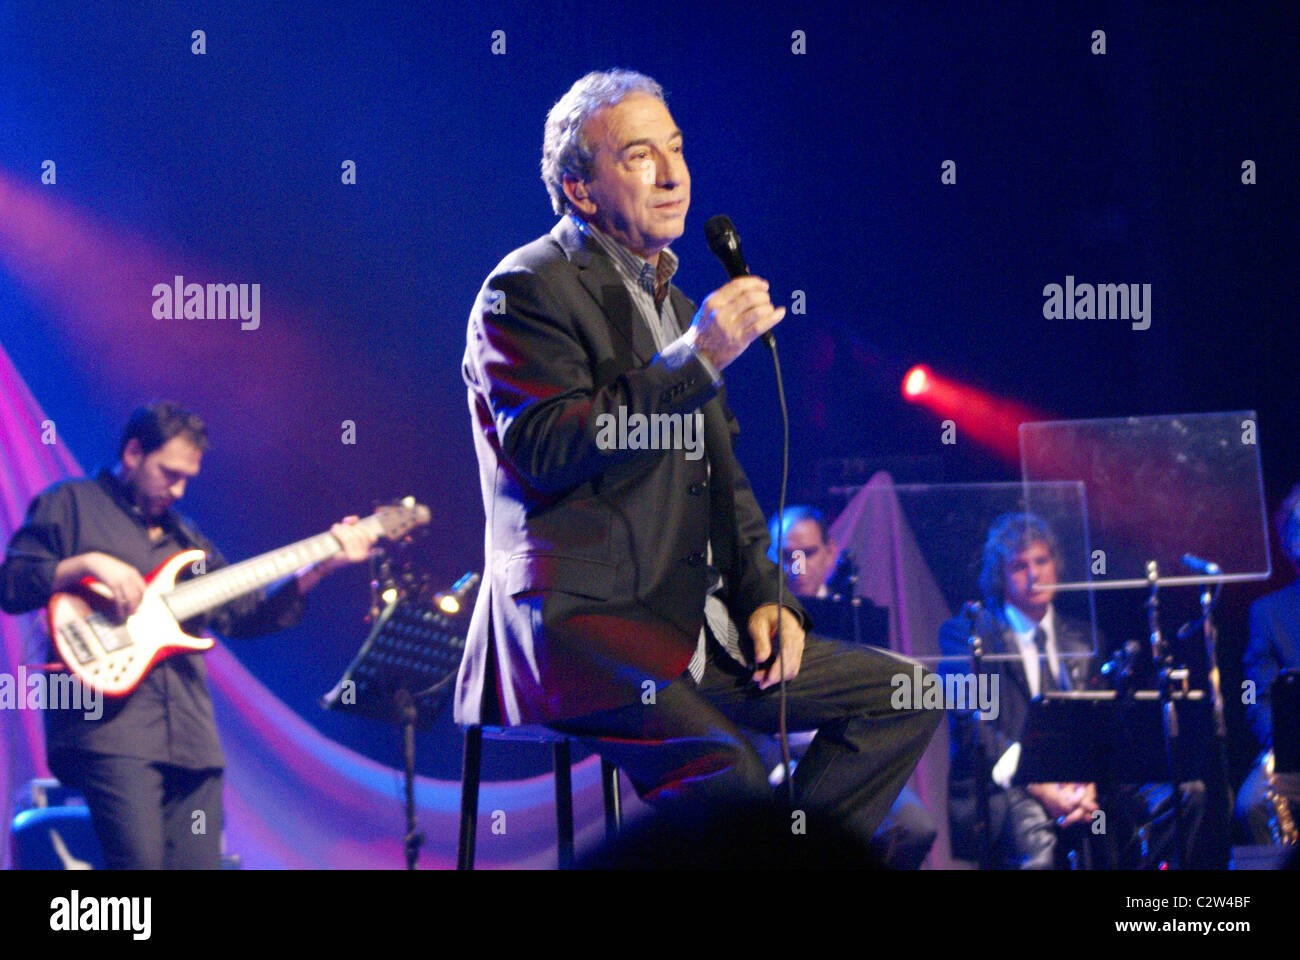 Jose Luis Perales performing live in concert at the Gran Rex Theatre Buenos Aires, Argentina - 11.07.08 Stock Photo